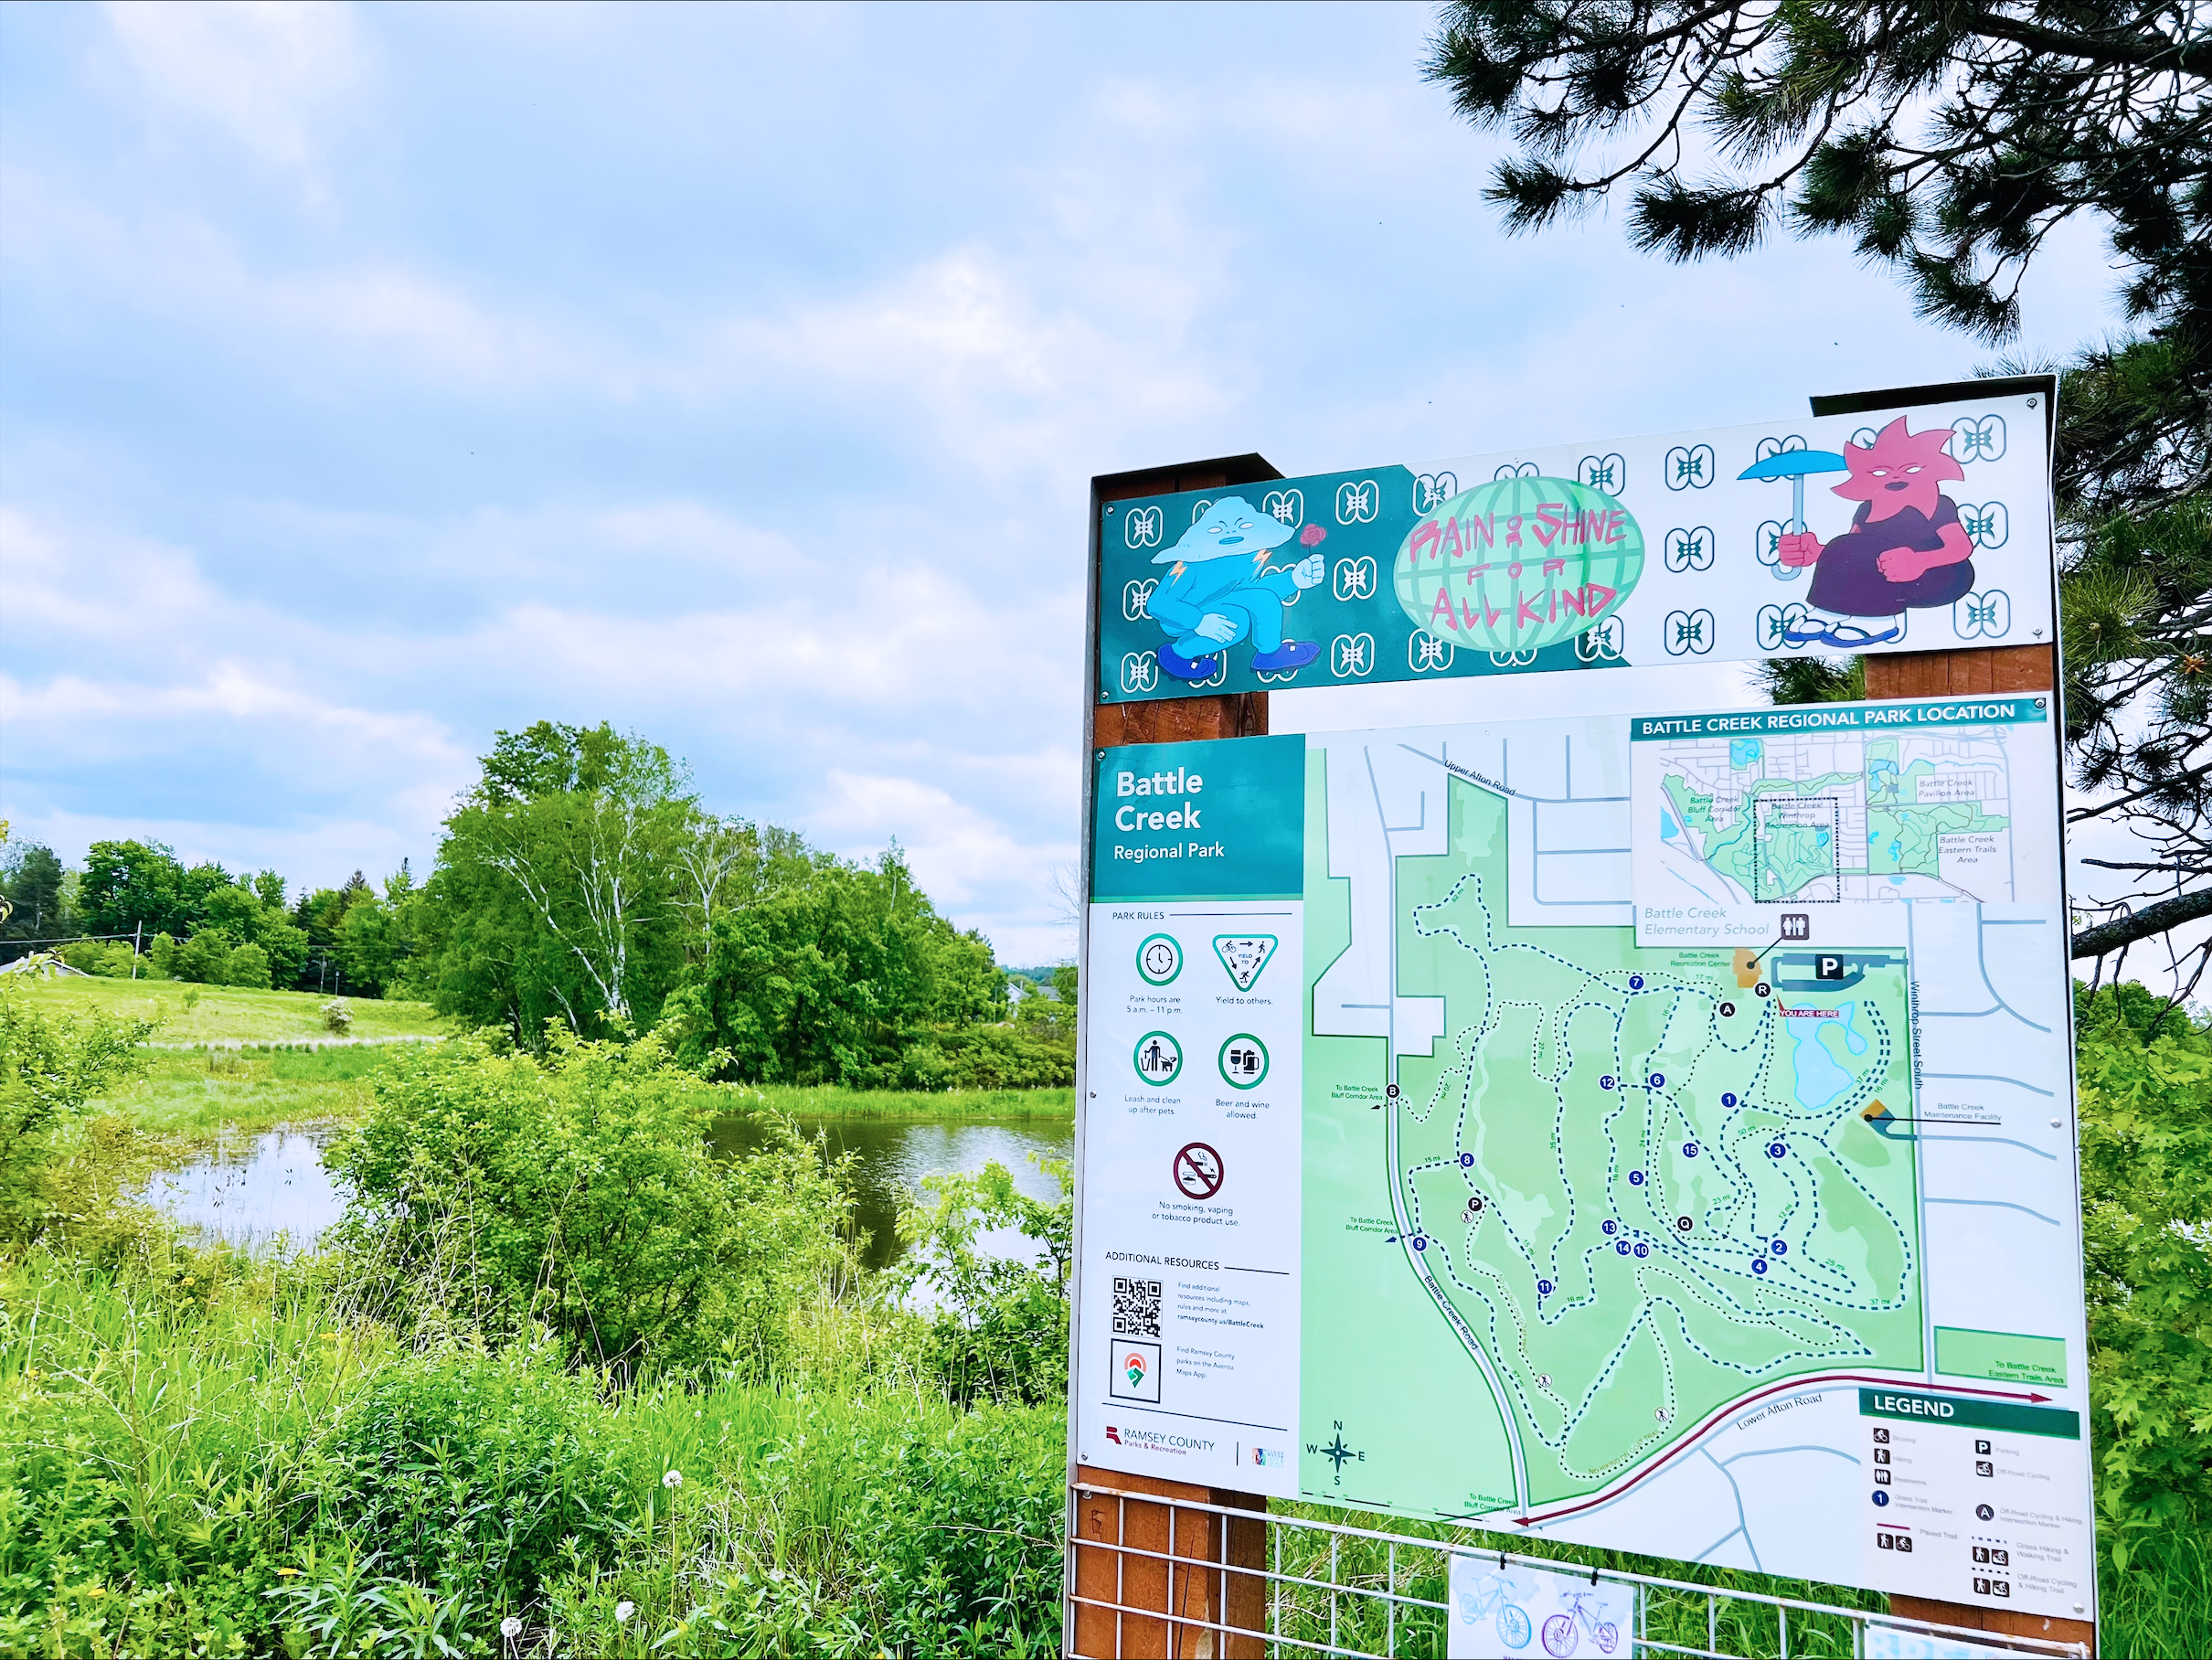 Battle Creek Recreation Trail sign that depicts a map of the area. On top of the map is artwork done by CIRCE of a red and blue caricature on either side with the words in the middle saying "rain or shine for all kind."